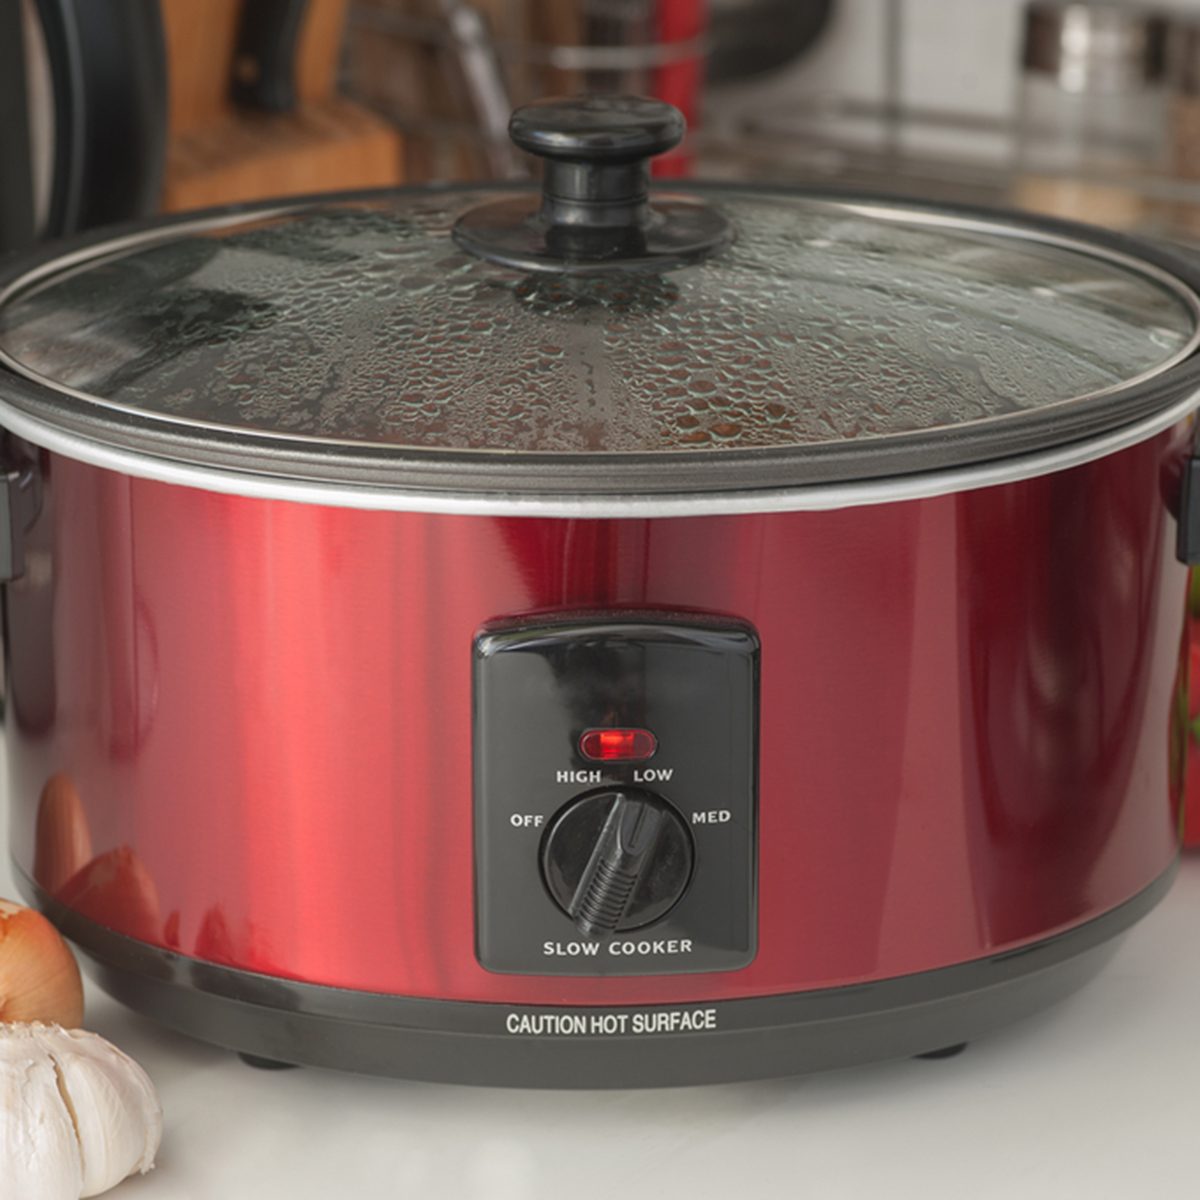 Can You Put a Crock-Pot in the Oven? (Safety Guide) - Prudent Reviews